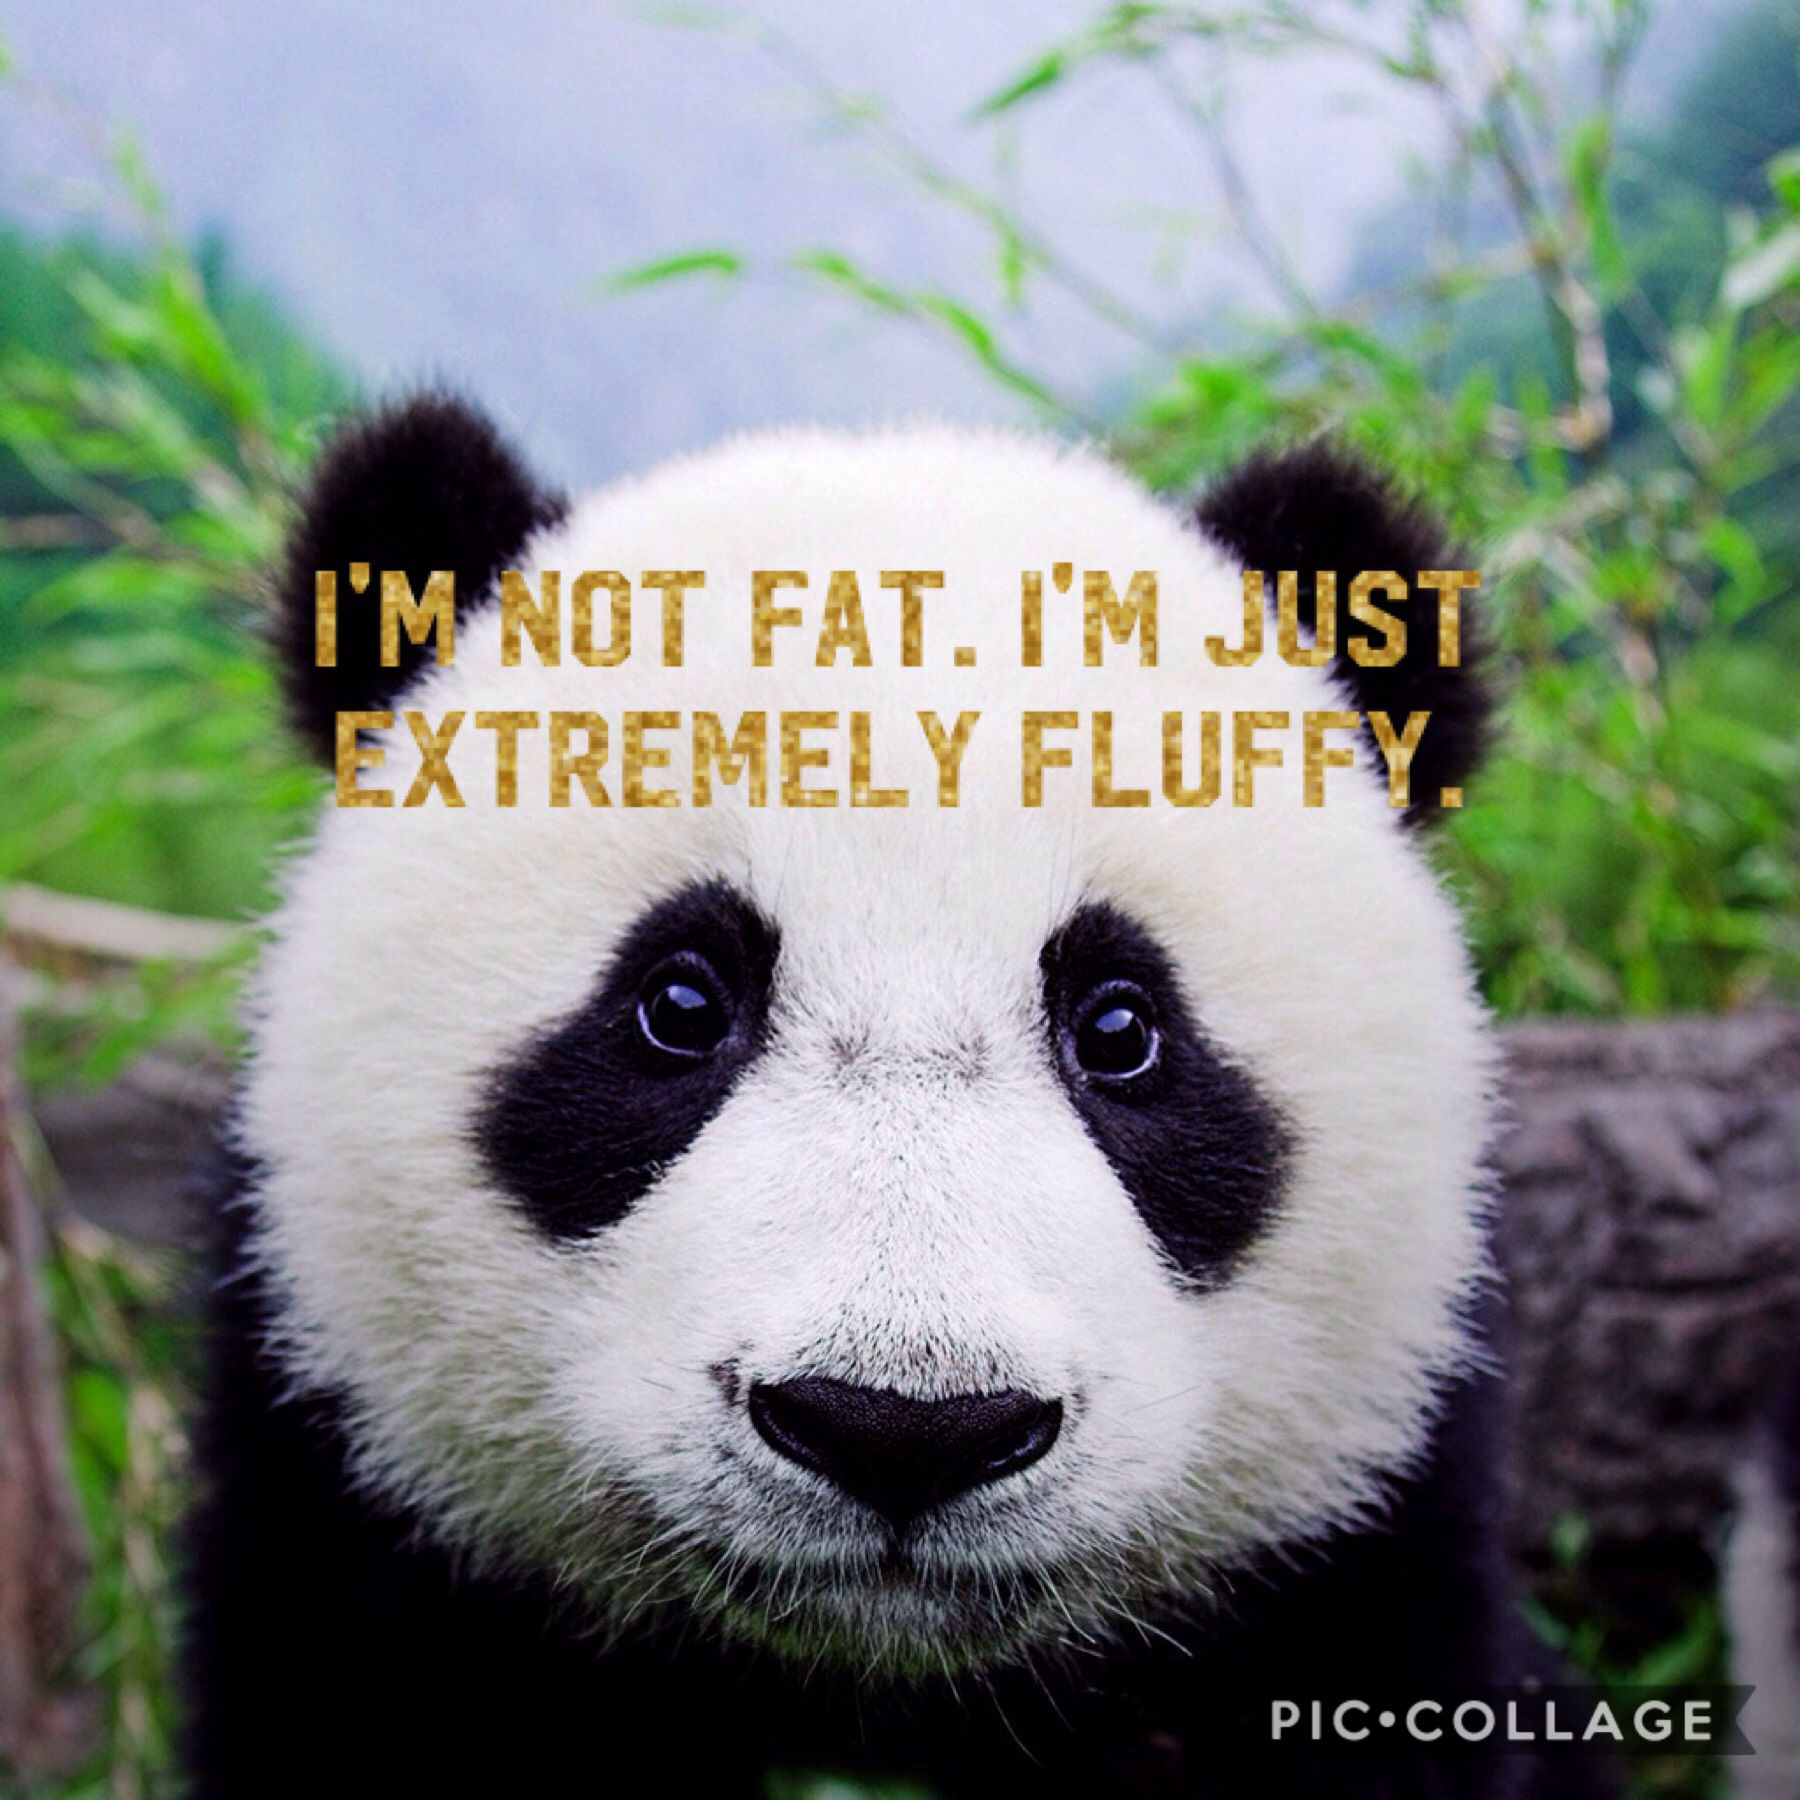 Tap
Pandas are my favorite animal! They are sooo cute! Comment what your favorite animal is 